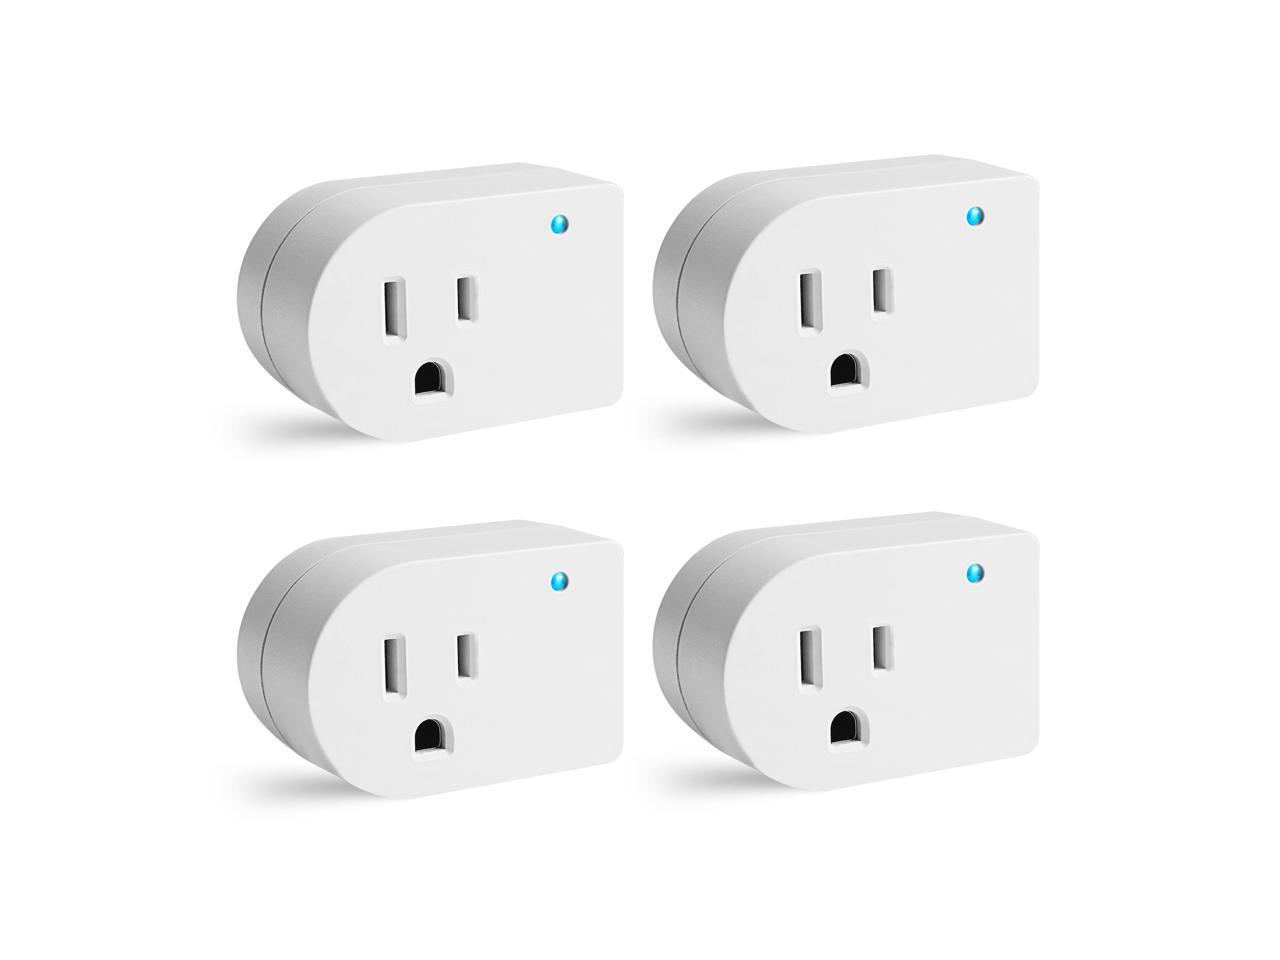 1 Outlet,245J/125V White UL 3Pack Grounded Outlet Wall Tap Adapter with Indicator Light Single Surge Protector Plug